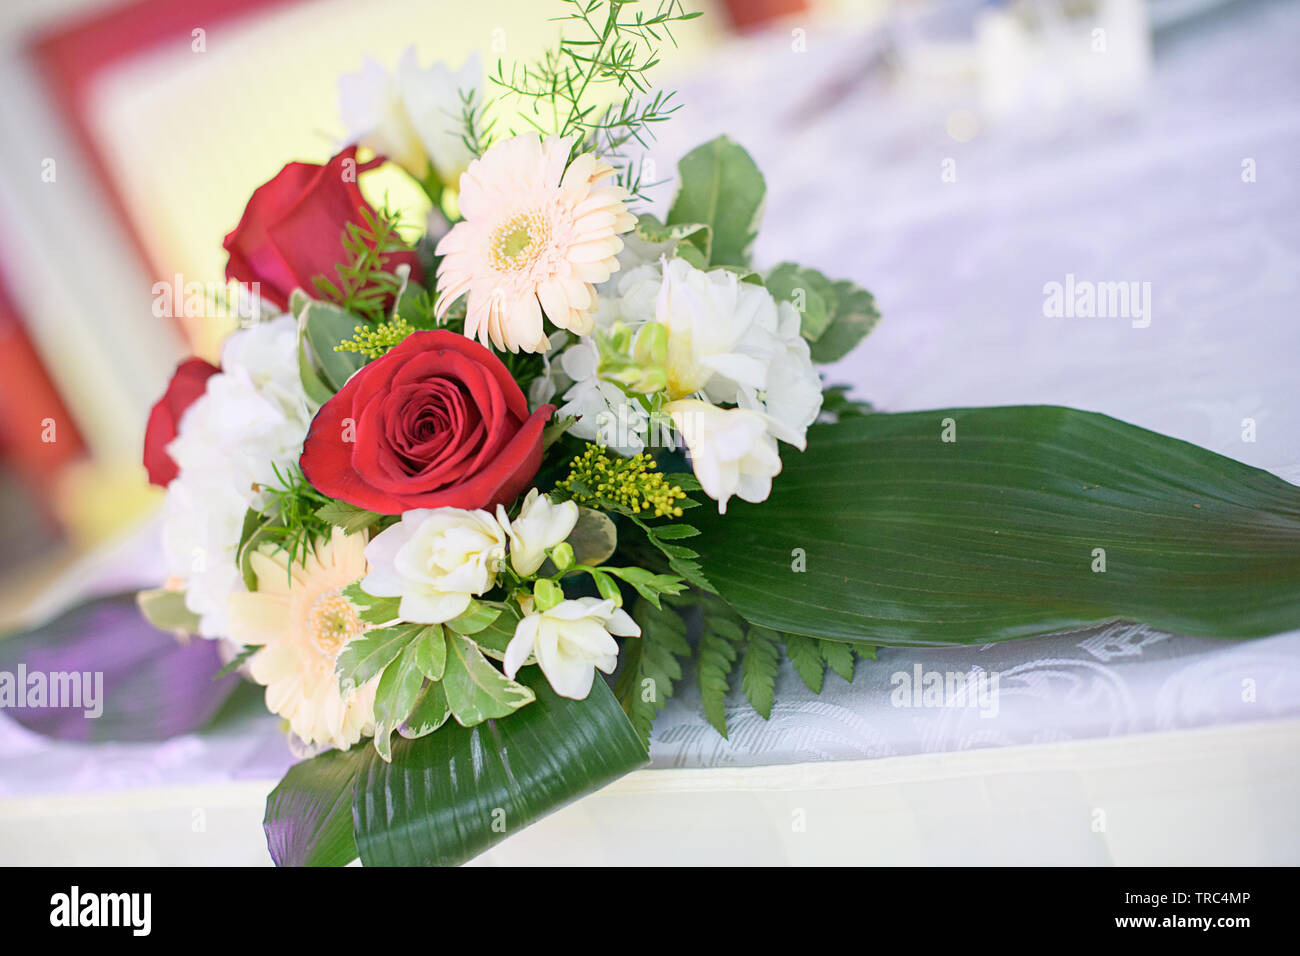 Romantic wedding decor for bride and groom or guests dinner tables at the reception venue or restaurant with beautiful floral centerpieces Stock Photo